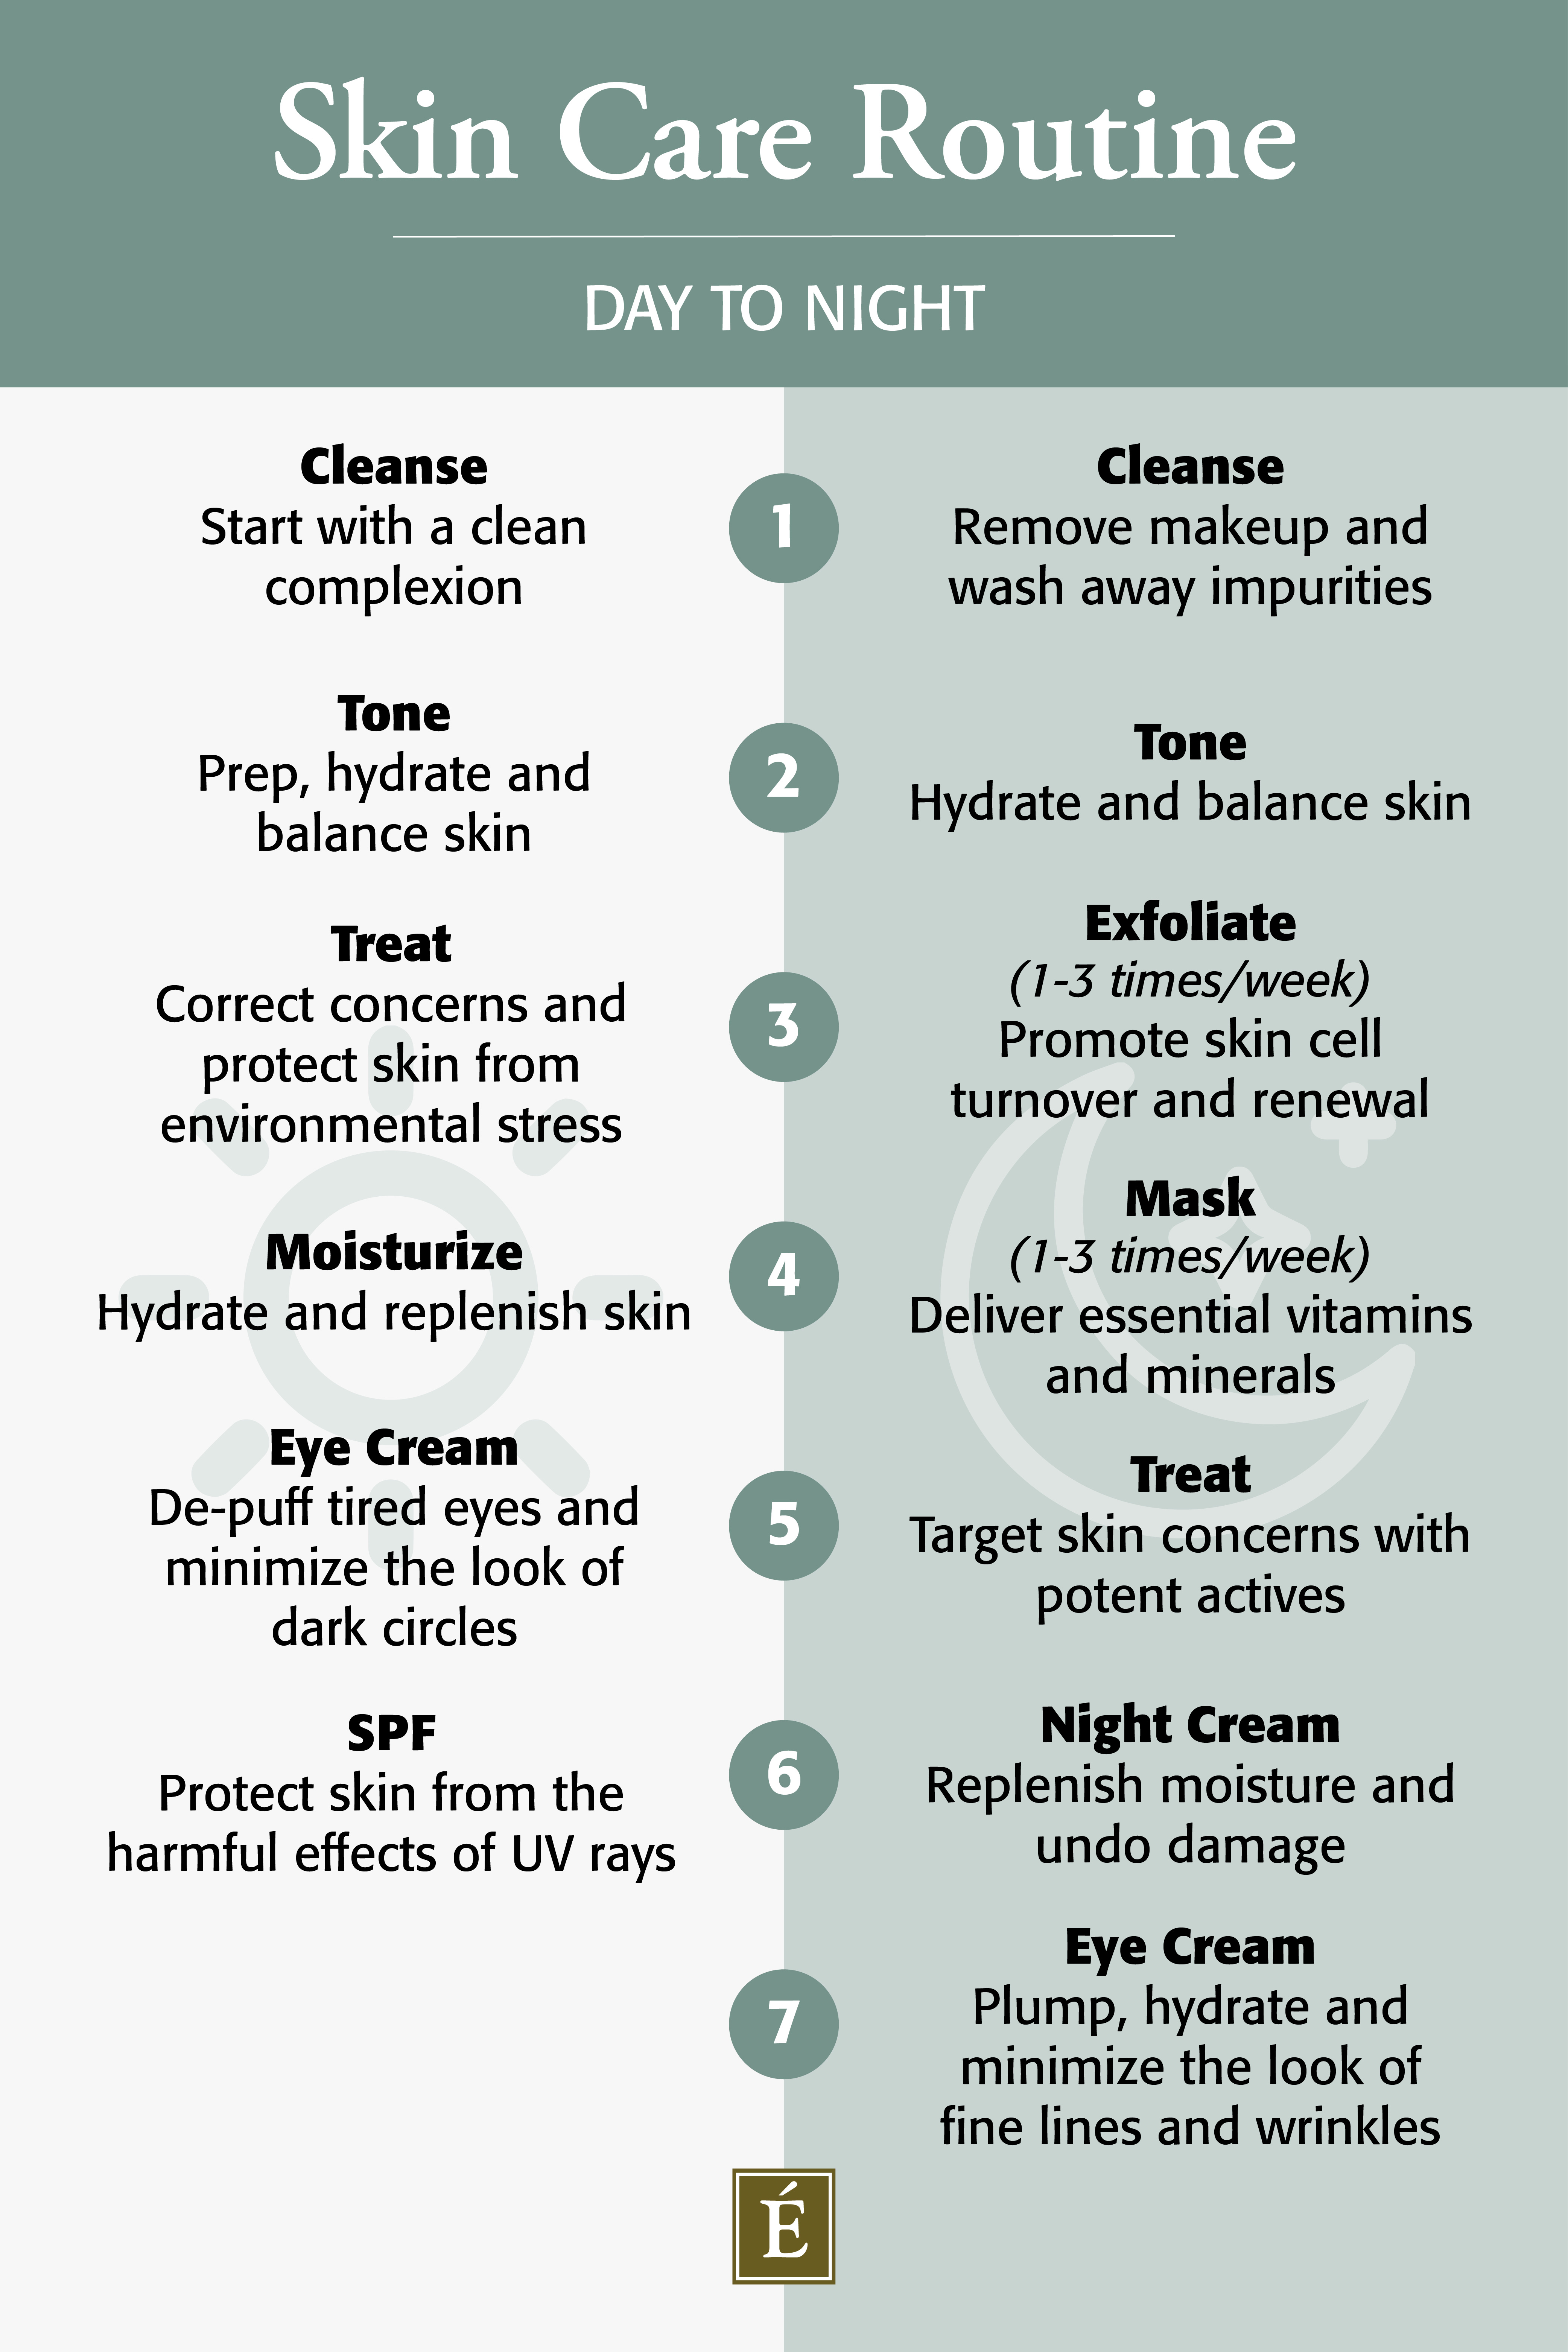 Essential Oils: 5 Incredible Natural Oils For Every Skin Type- Infographic